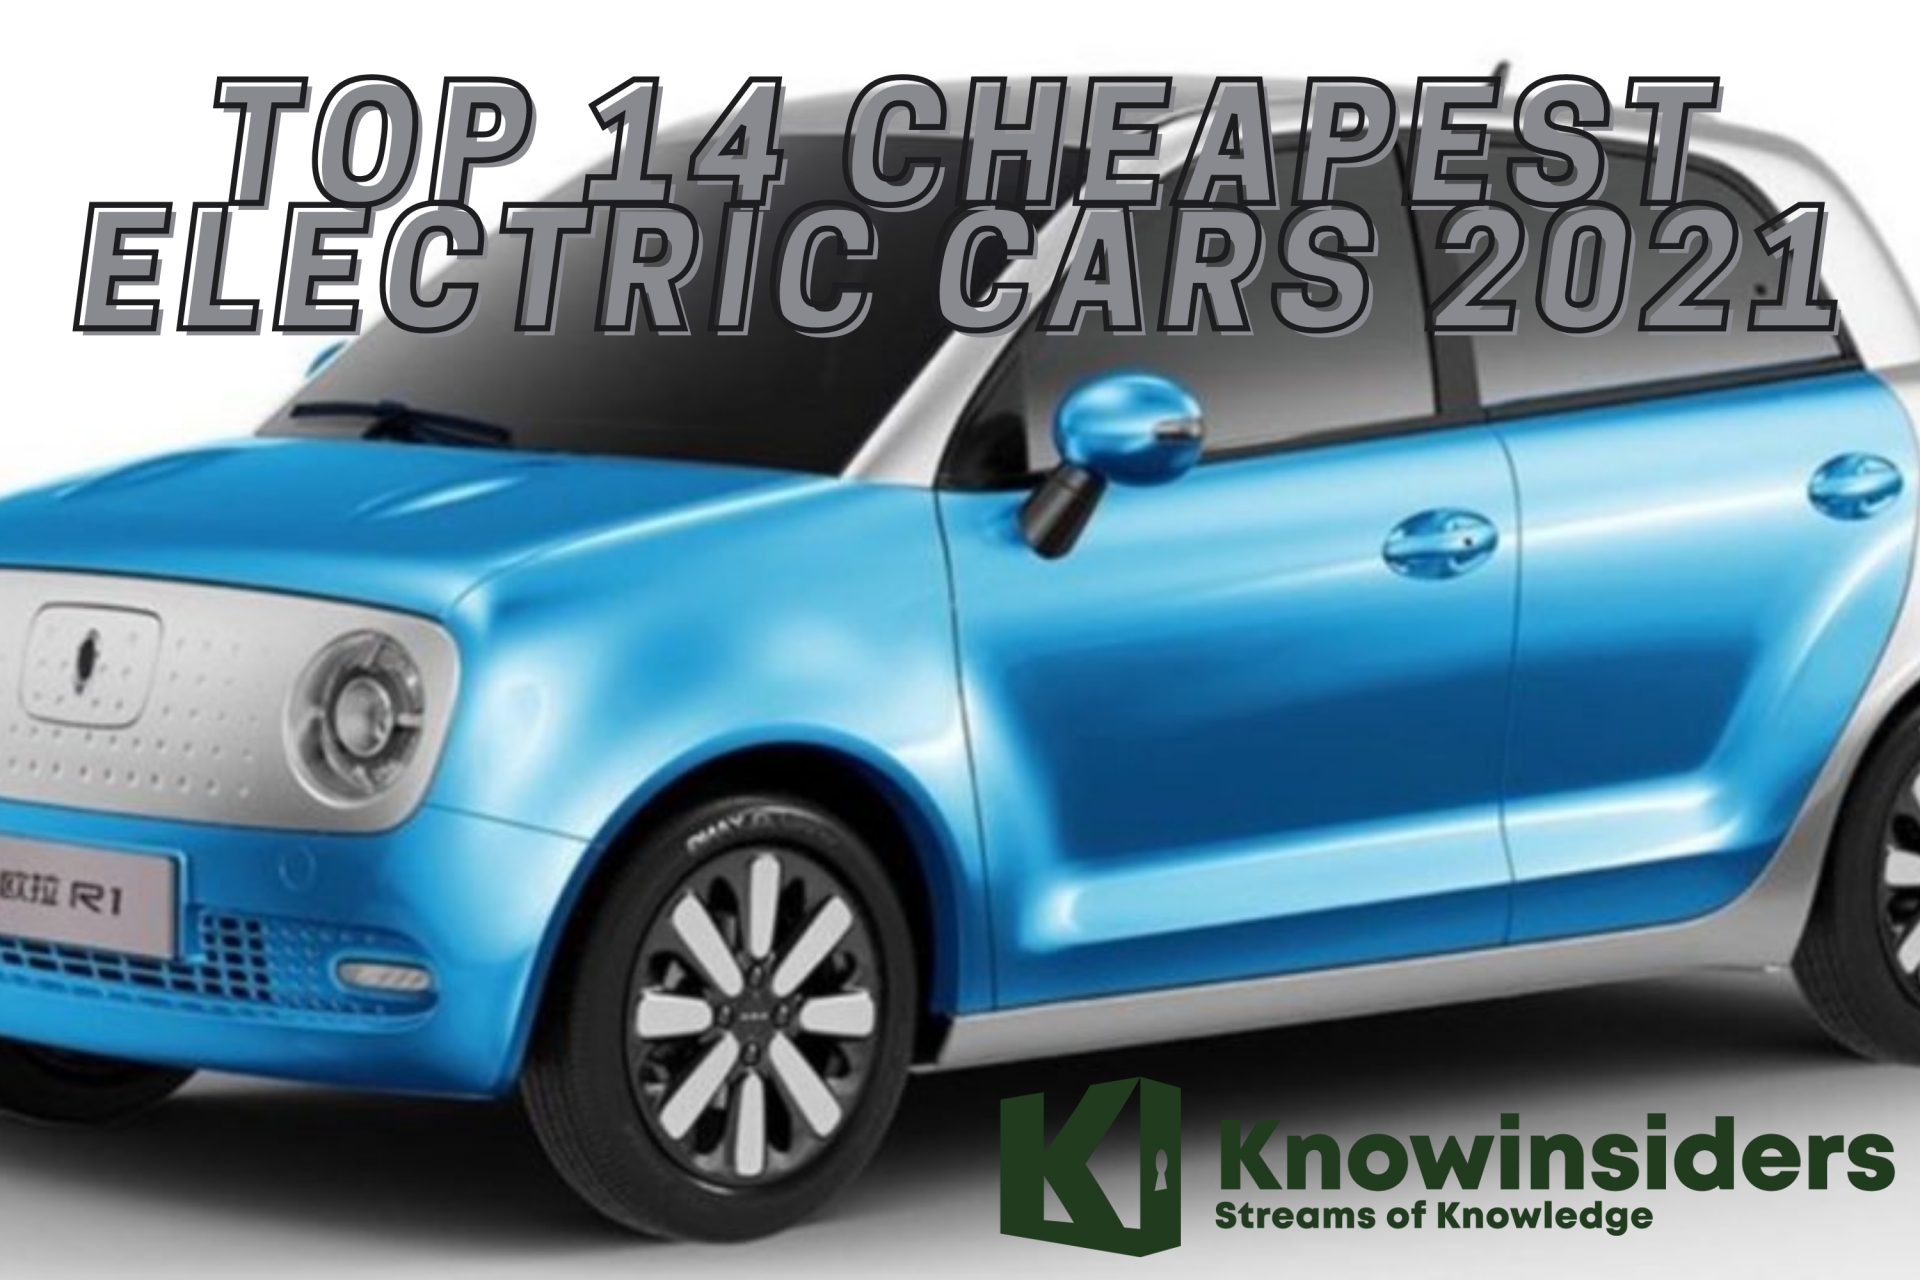 Top 14 Electric Cars - The Cheapest in 2021 - In the World